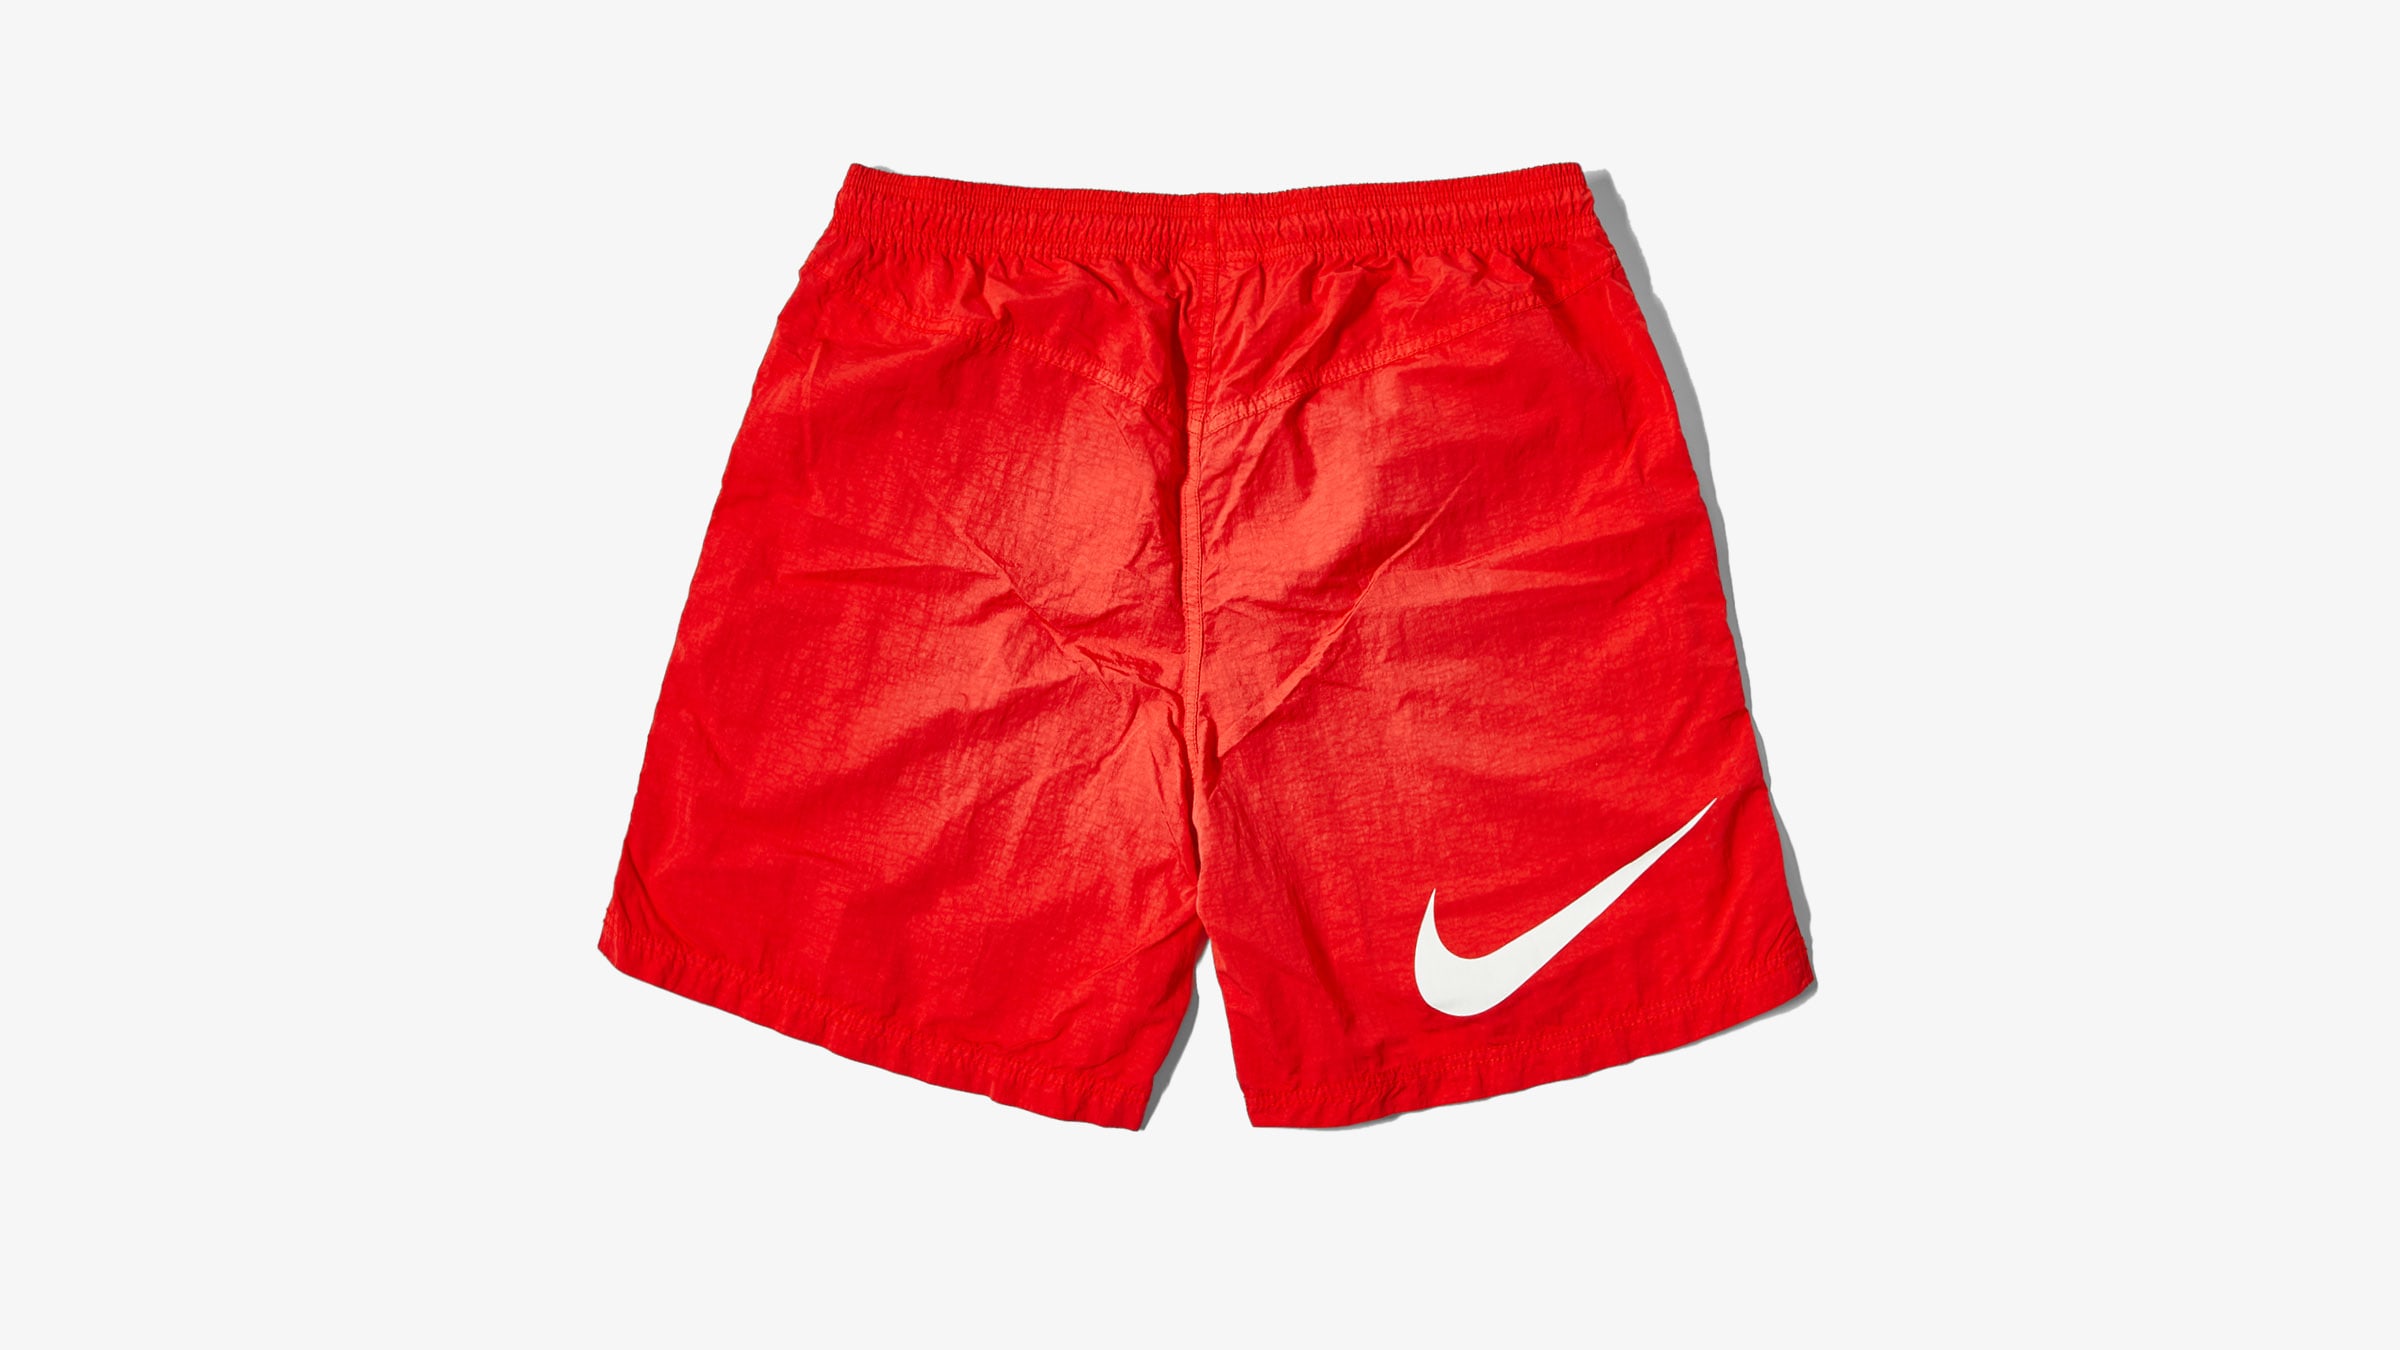 Nike x Stussy Water Short (Habanero Red) | END. Launches